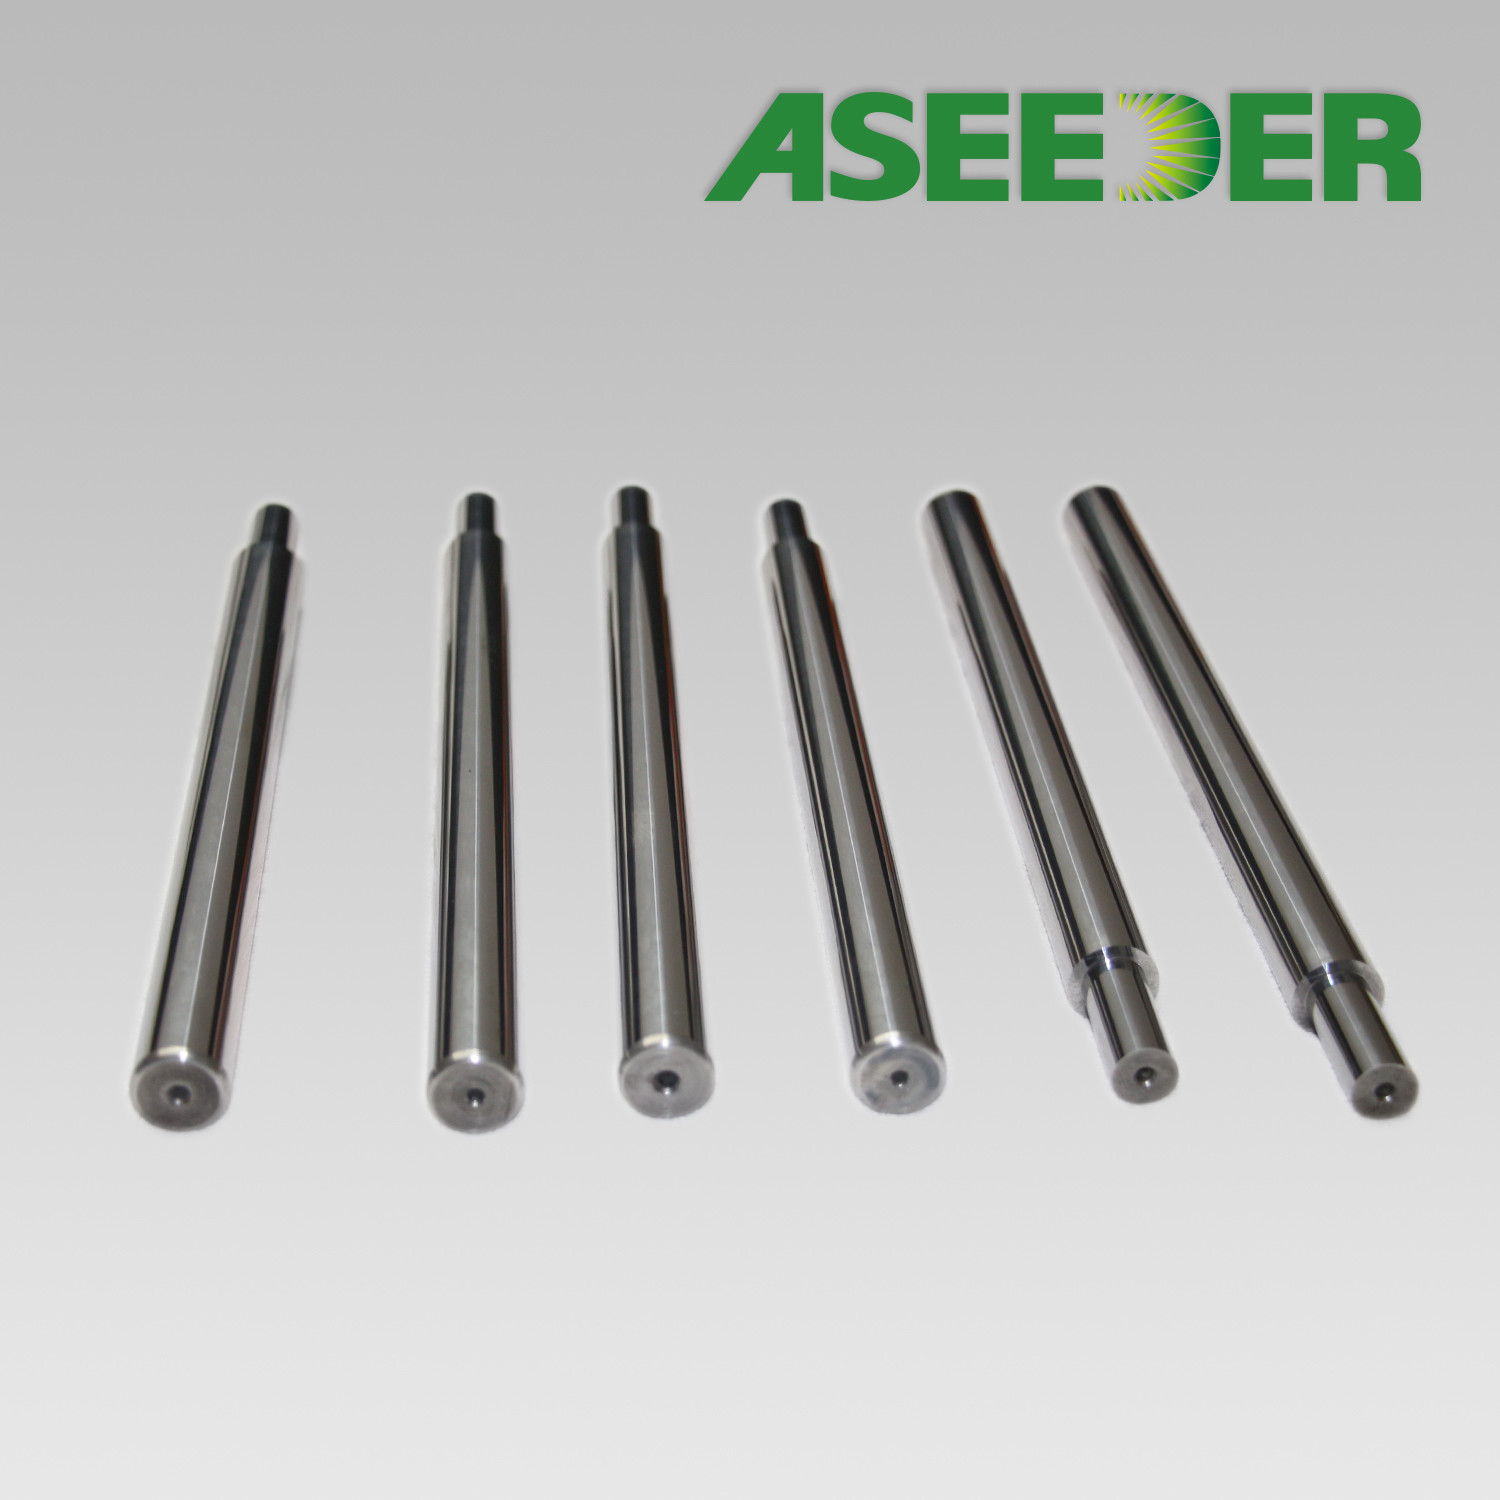  TC Coated ZY15-C Tungsten Carbide Rod Plunger For Critical Environment Manufactures